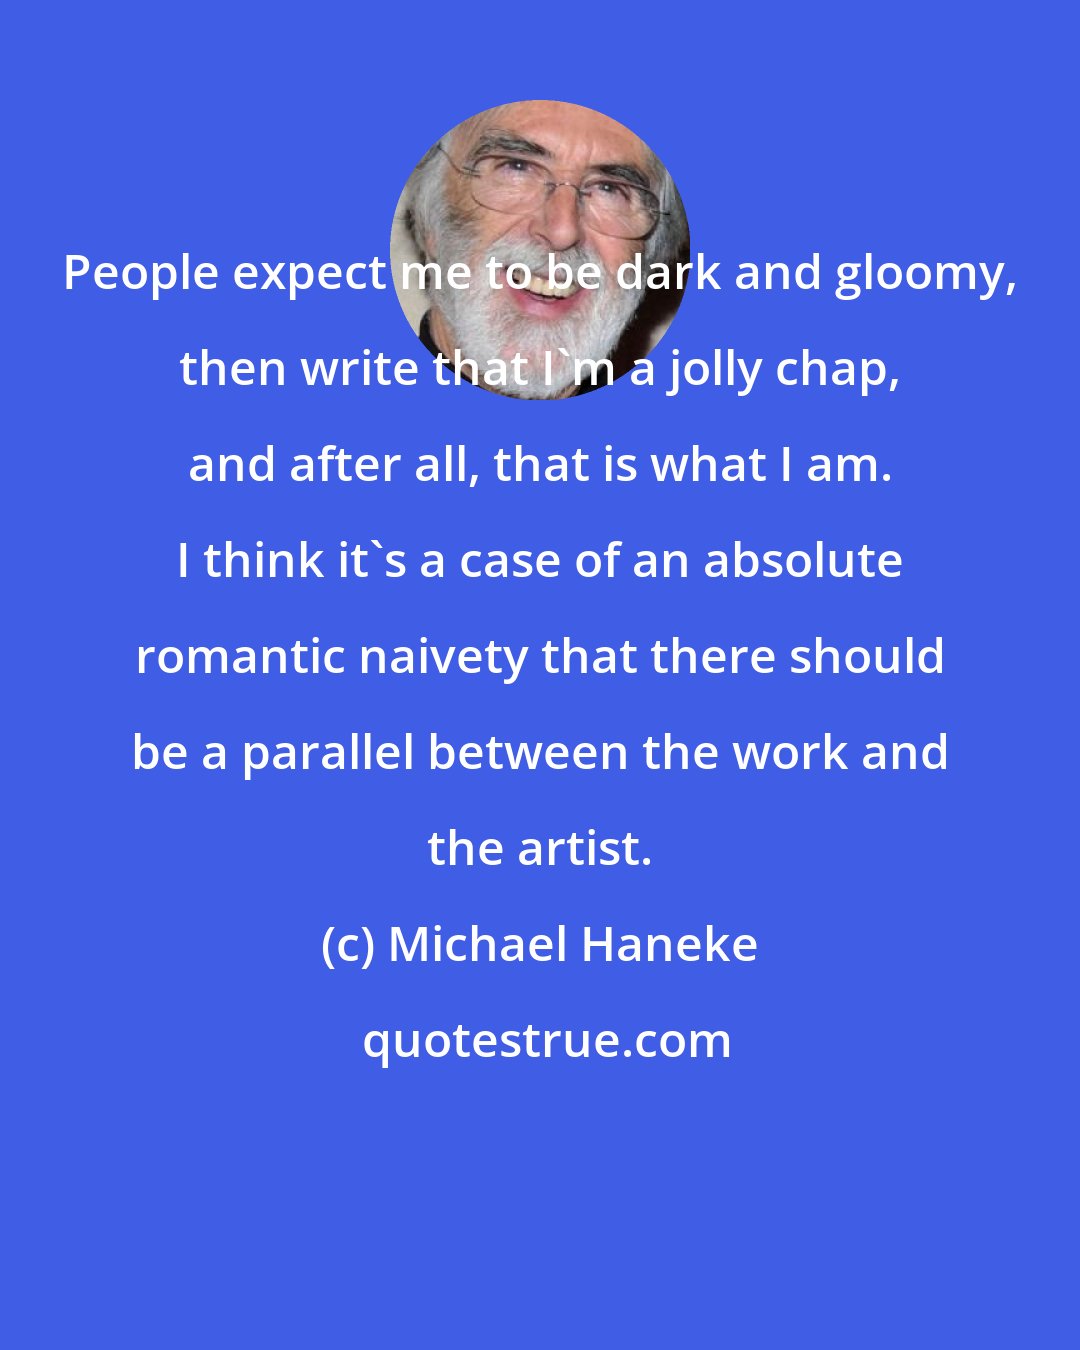 Michael Haneke: People expect me to be dark and gloomy, then write that I'm a jolly chap, and after all, that is what I am. I think it's a case of an absolute romantic naivety that there should be a parallel between the work and the artist.